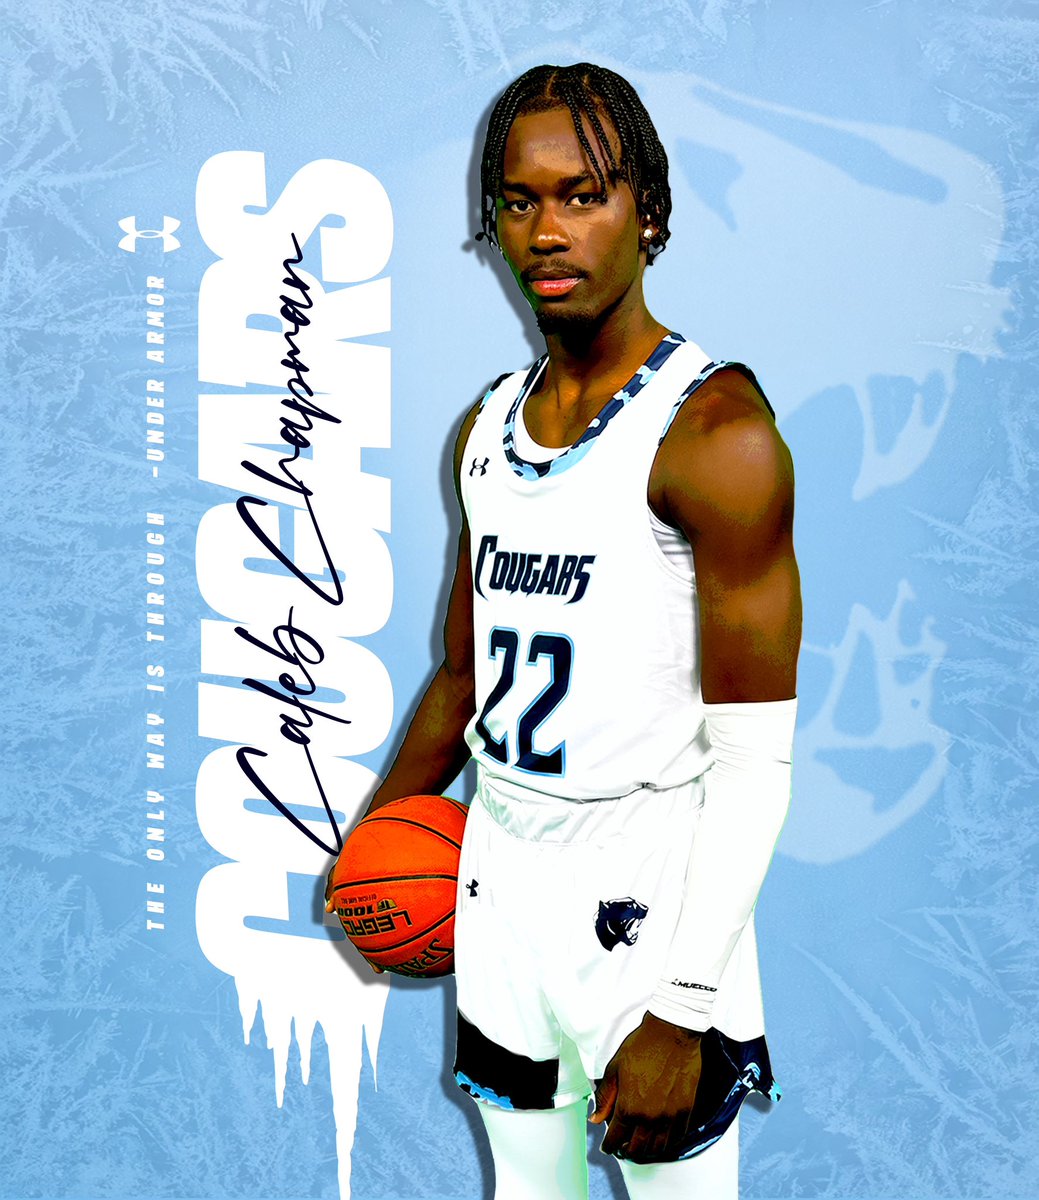 Cougar Nation, help us welcome back 6’7 Soph. W/F Caleb Chapman!! Averaged 10ppg 6rpg last season!! Expecting a breakout year!! #WATCHYAHEAD #GOCOUGARS 🔵⚪️🔵 Highlights Below 👇👇👇 youtu.be/0vnfO2jY22g?si…